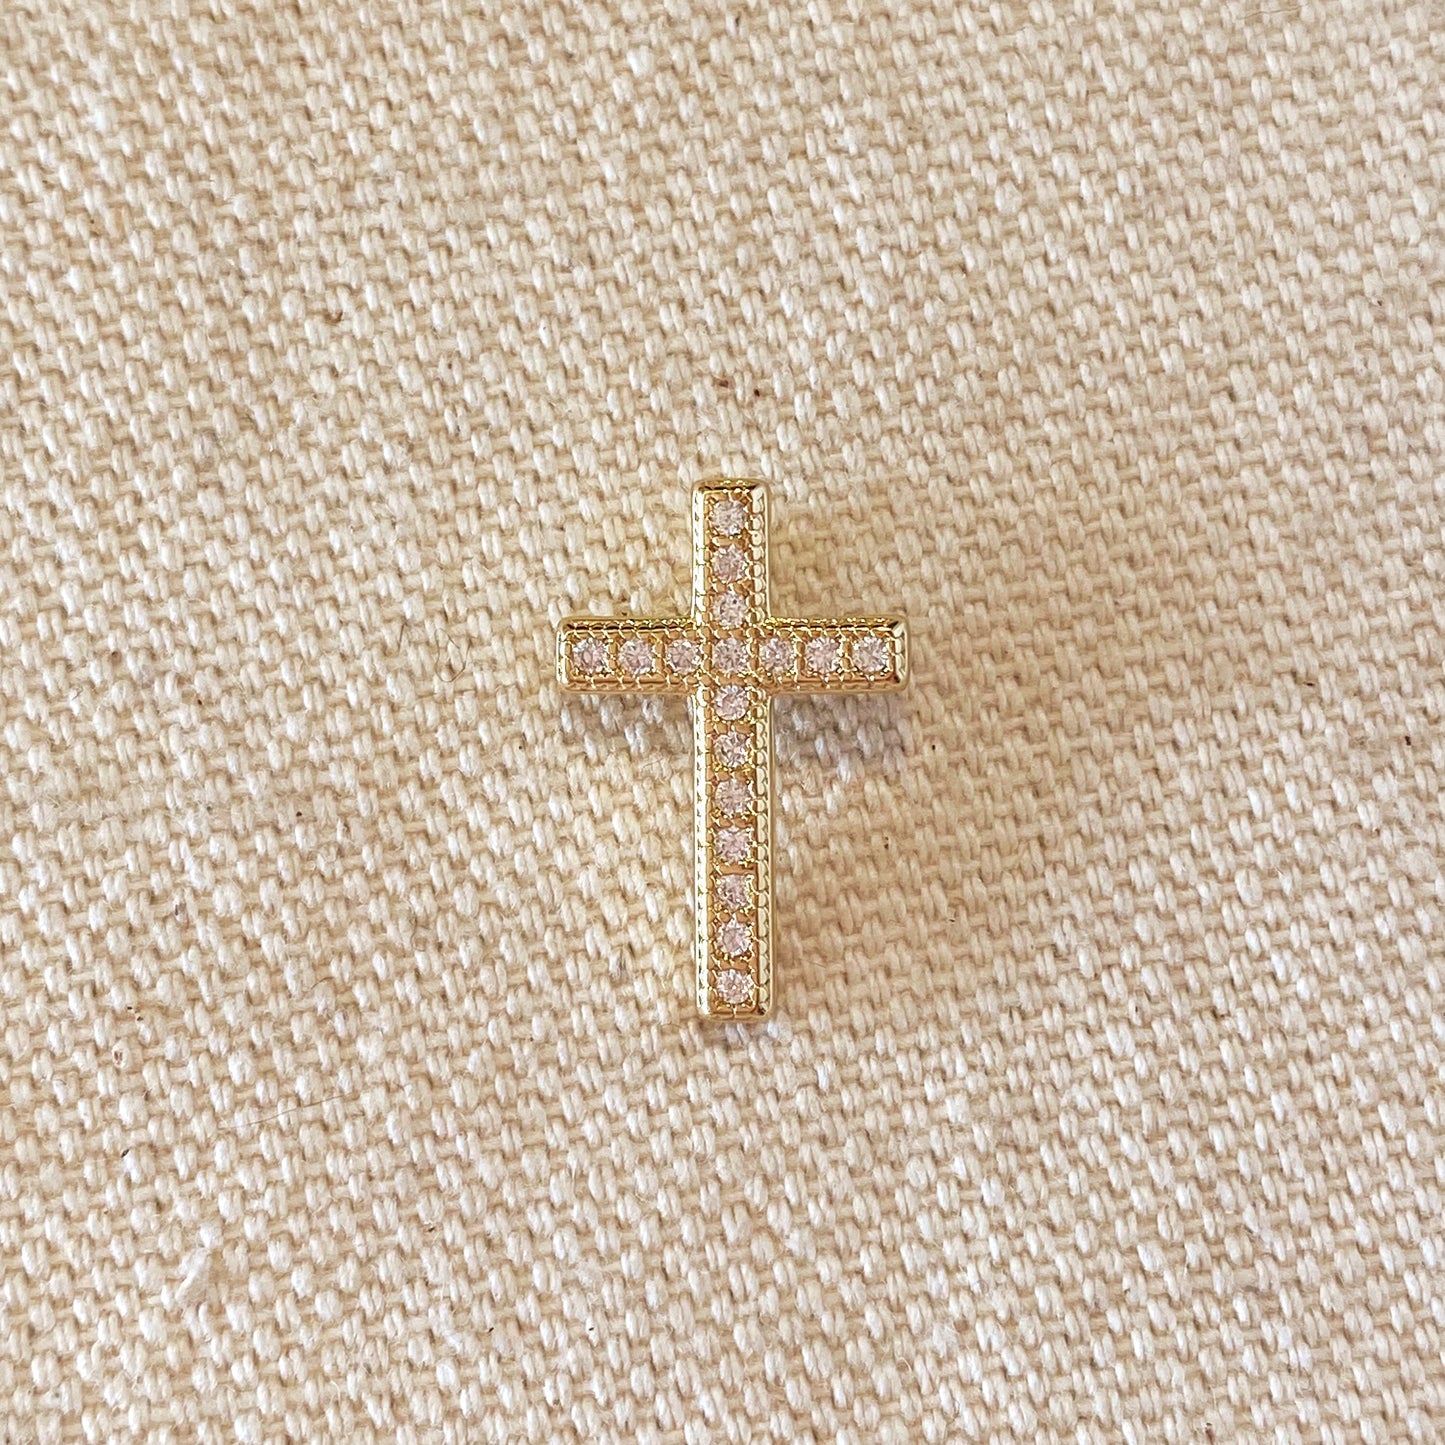 18k Gold Filled Cross Pendant With Micro Cubic Zircon Stones